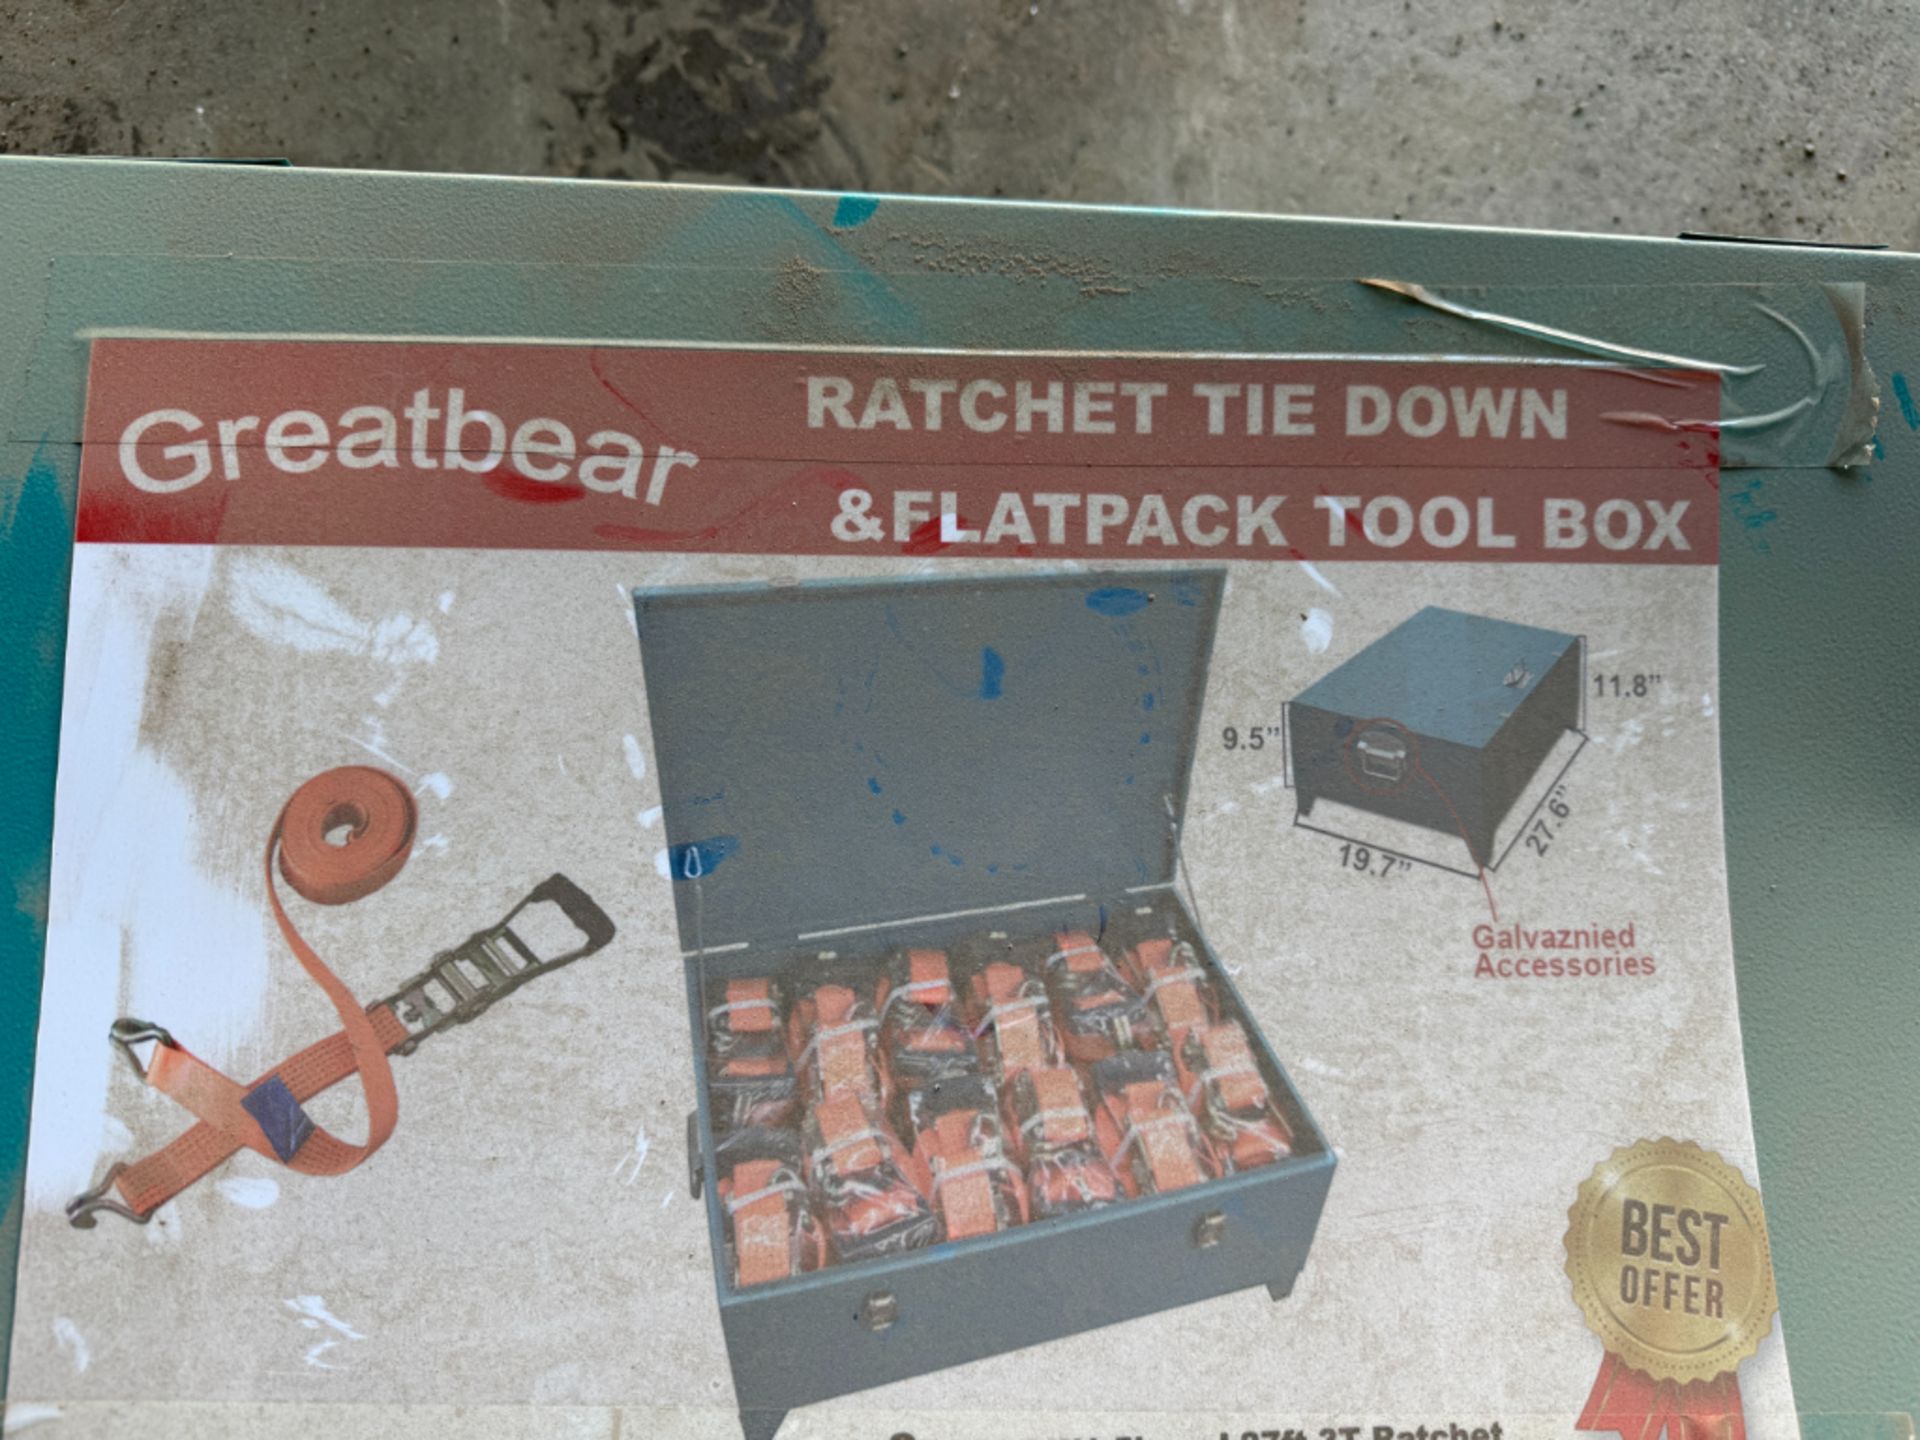 Greatbear Ratchet Tie Down & Flatpack Tool Box - Image 6 of 6